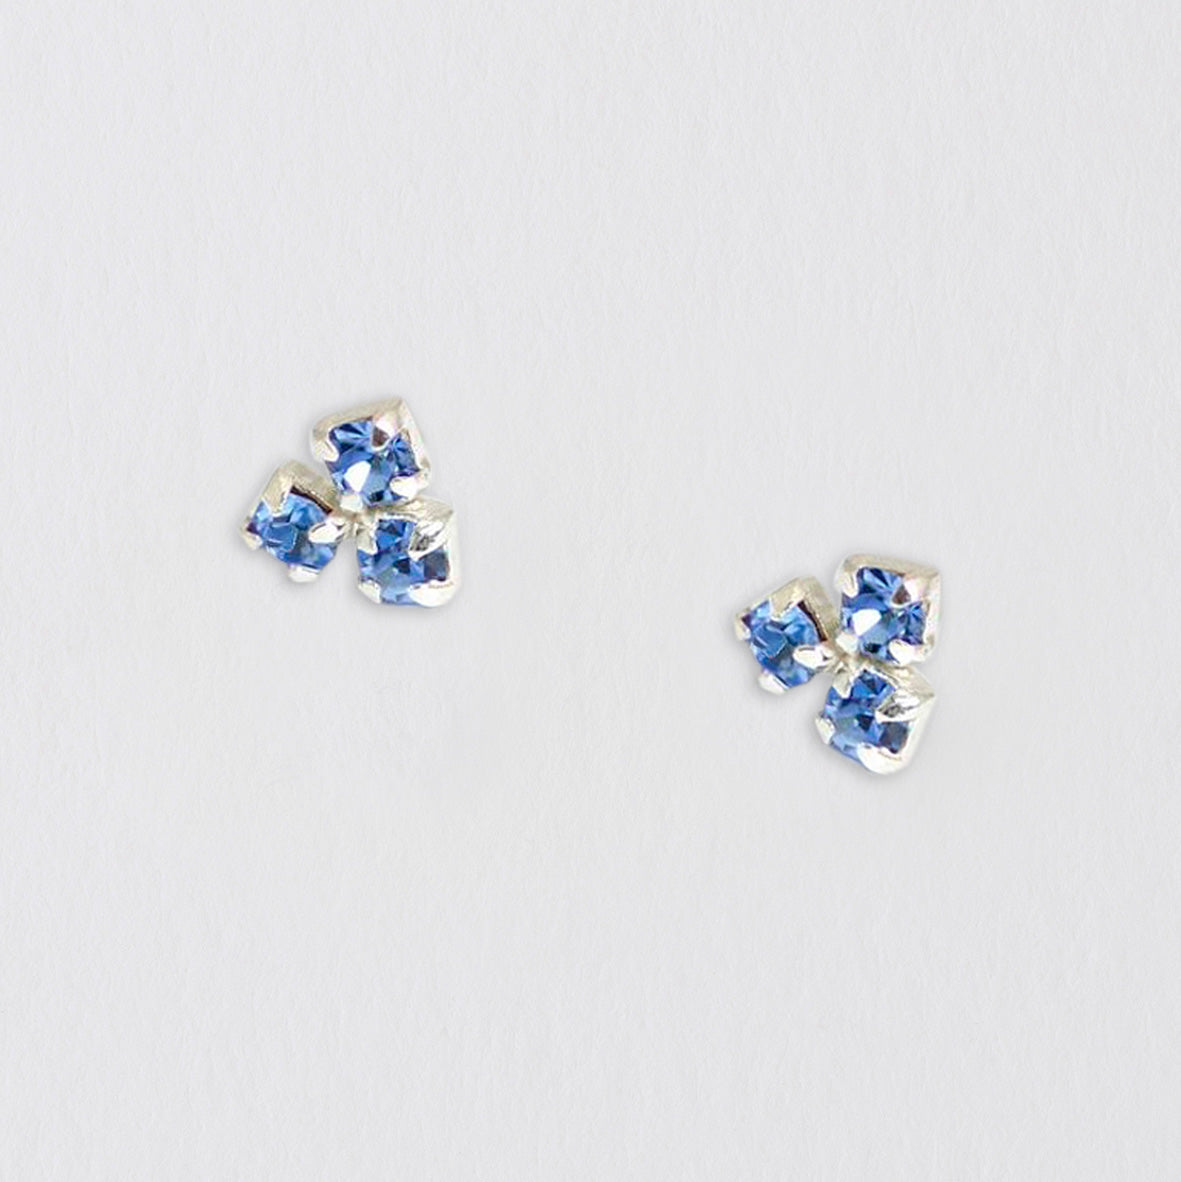 Light Sapphire Crystal Cluster Silver Ear Stud Earrings Crumble and Core   